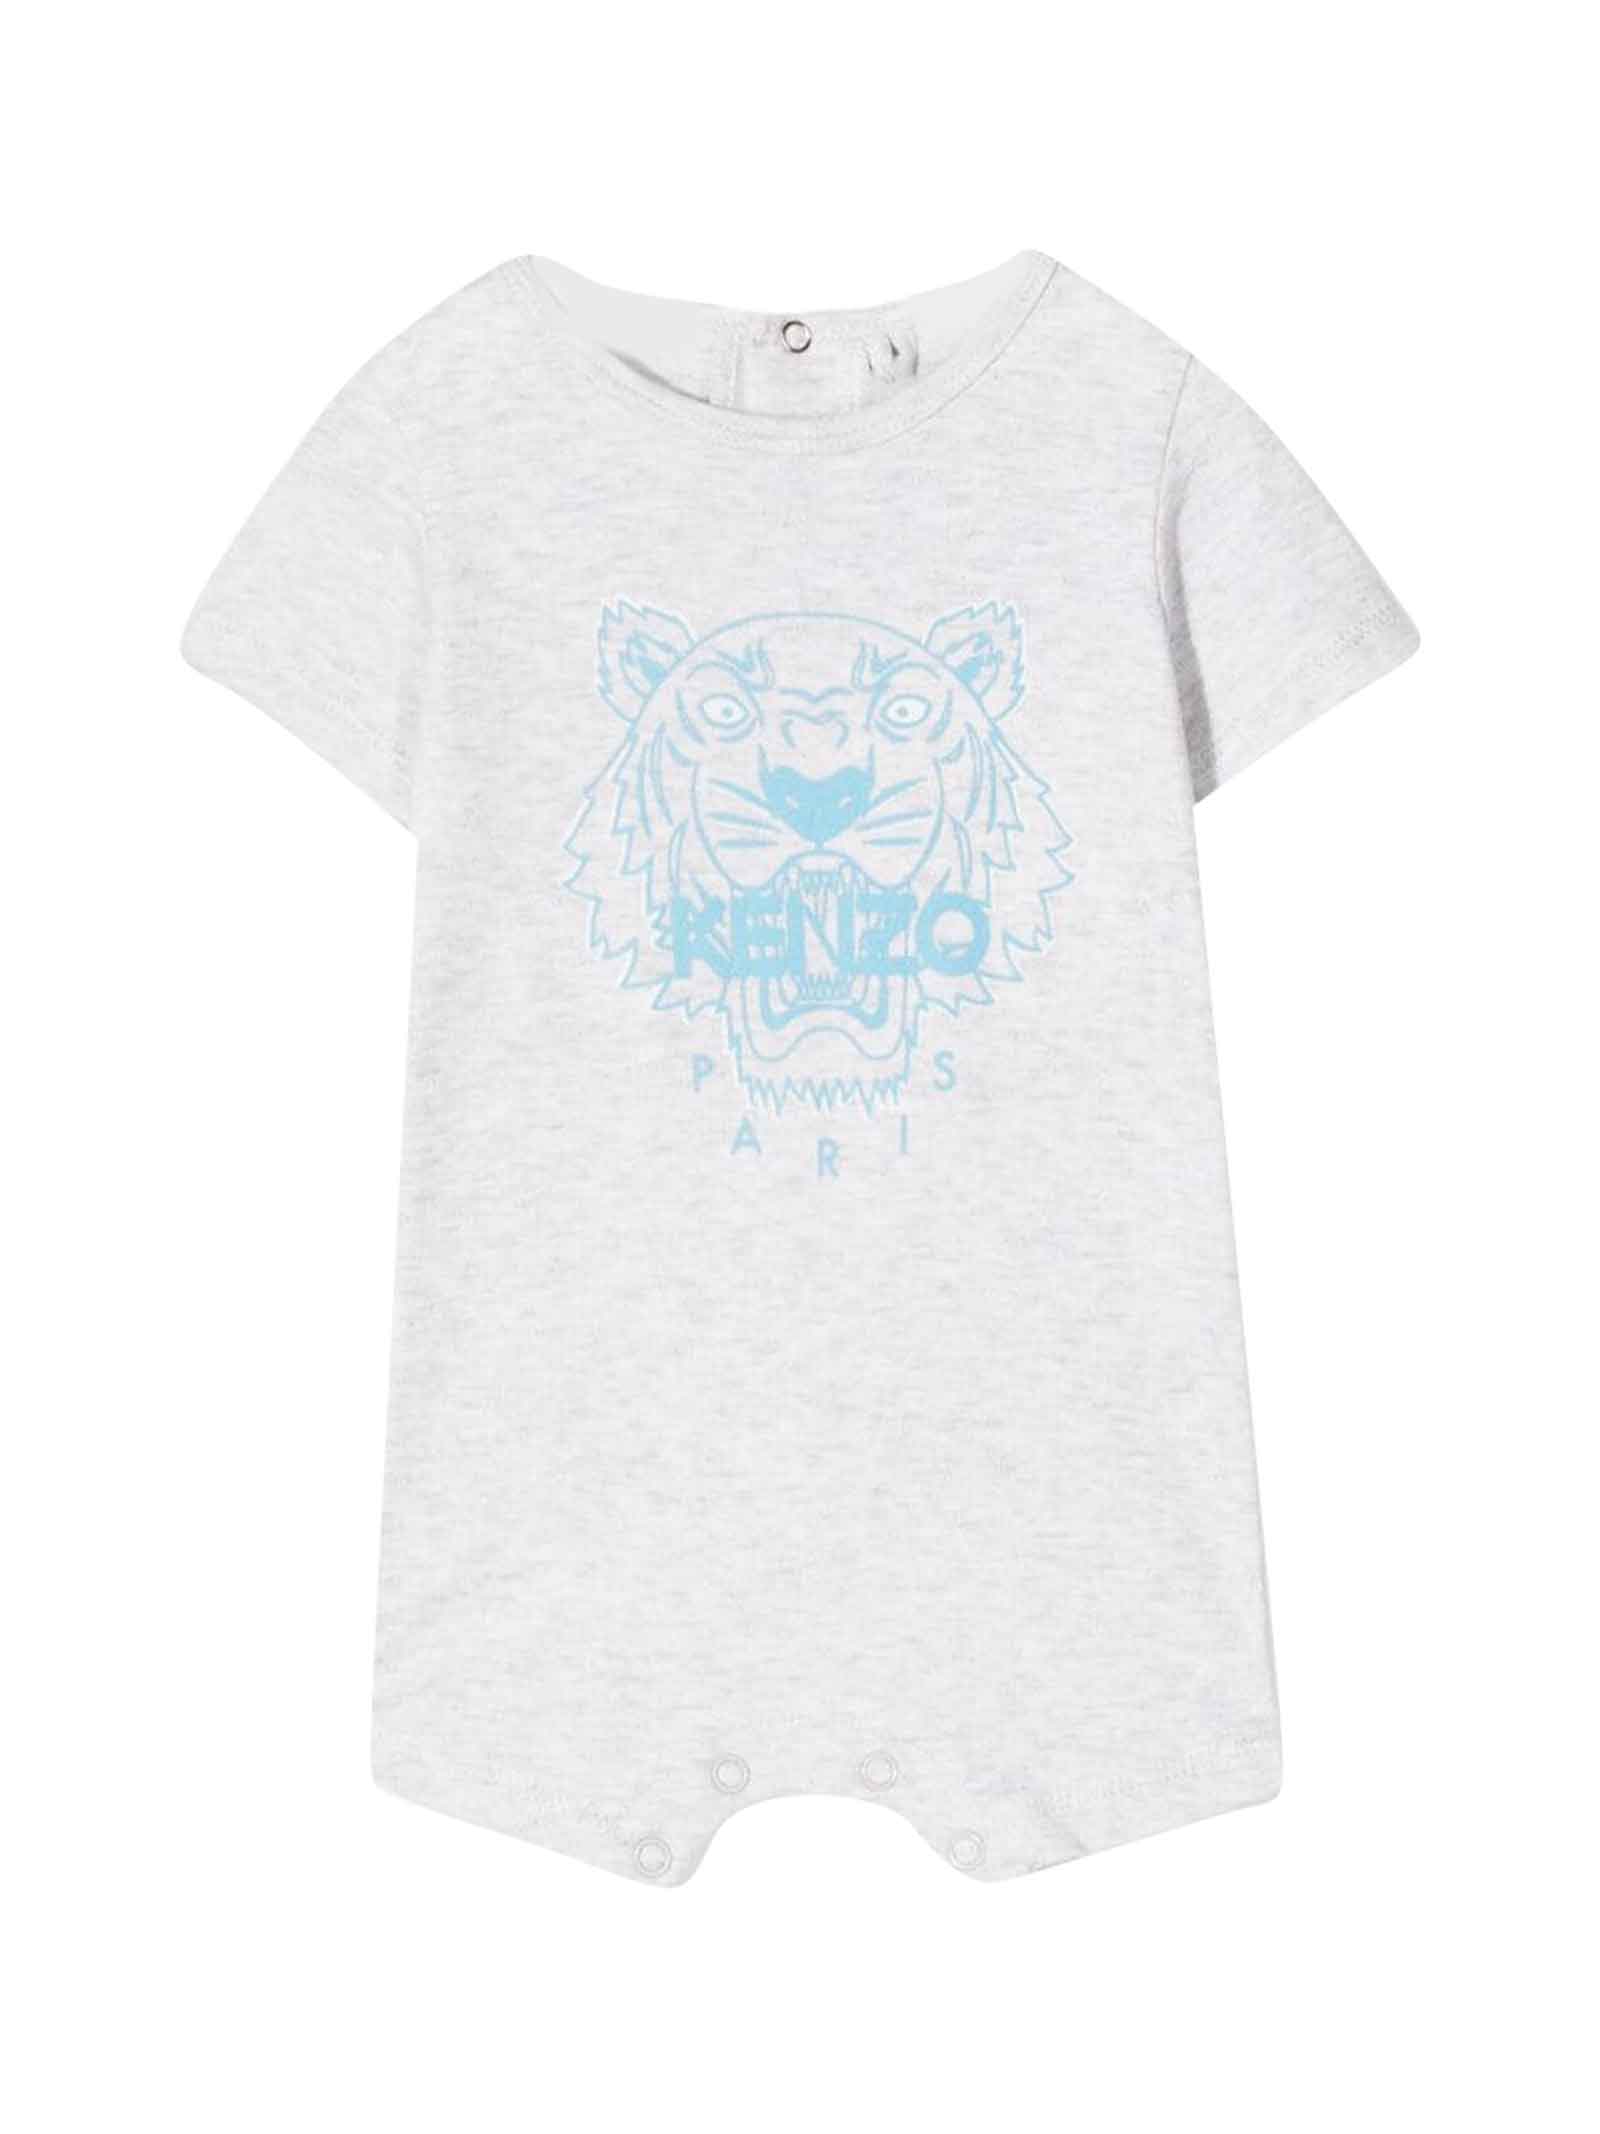 Kenzo Kids Light Gray Newborn Onesie With Light Blue Tiger Print On The Front, Crew Neck, Short Sleeves, Snap Button Closure By.